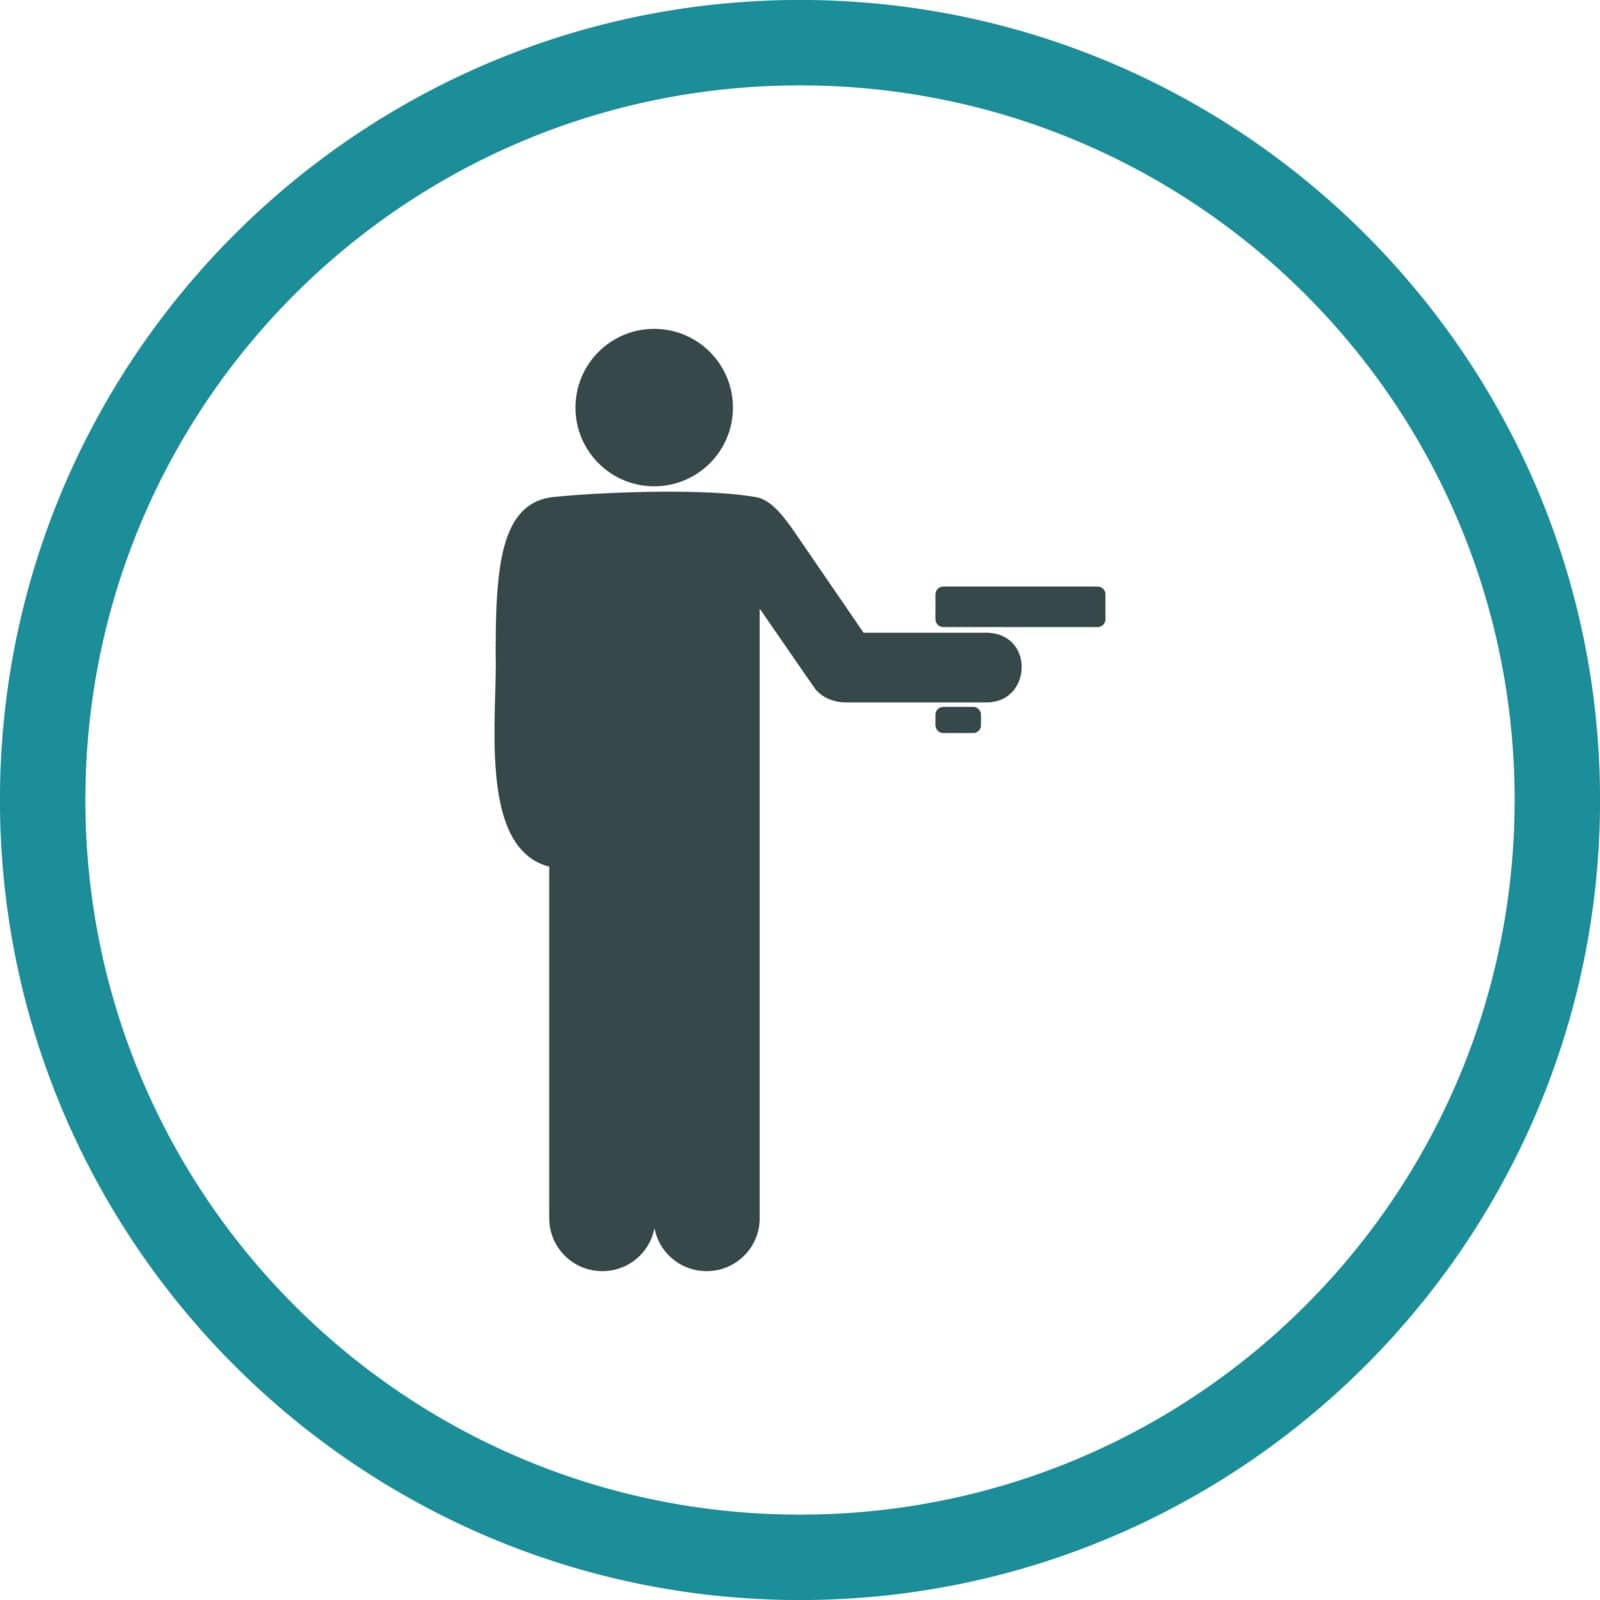 Robbery vector icon. This rounded flat symbol is drawn with soft blue colors on a white background.